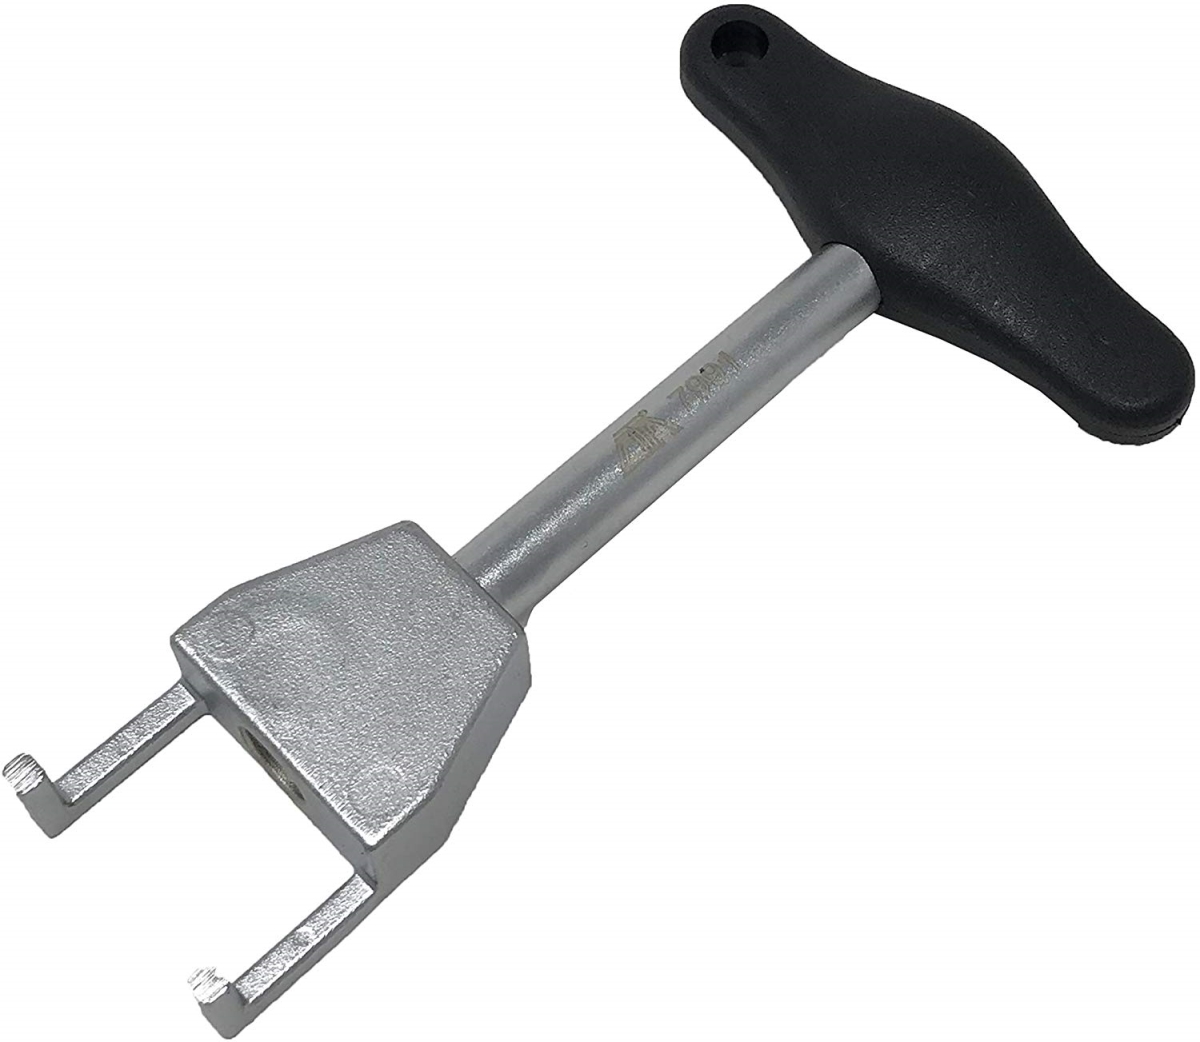 Cta7991 4-cyl Ignition Coil Puller